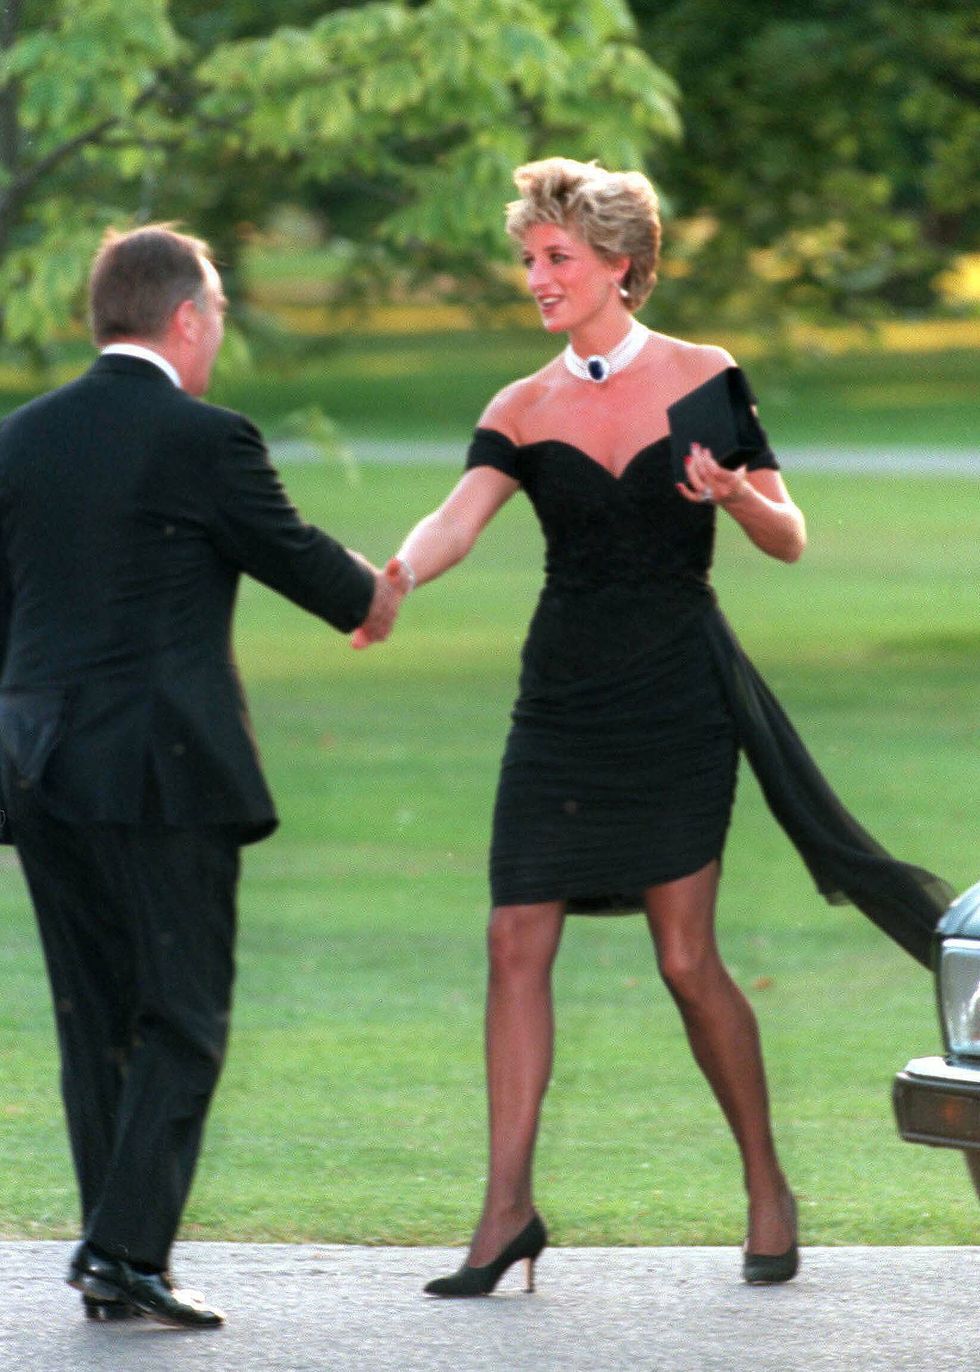 london   november 20  diana, princess of wales, wearing a stunning black dress commissioned from christina stambolian, attends the vanity fair party at the serpentine gallery on november 20, 1994 in london, england  the famous black revenge dress was a spectacular coup by the princess, worn on the very evening that prince charles made his notorious adultery admission on television photo by anwar husseinwireimage